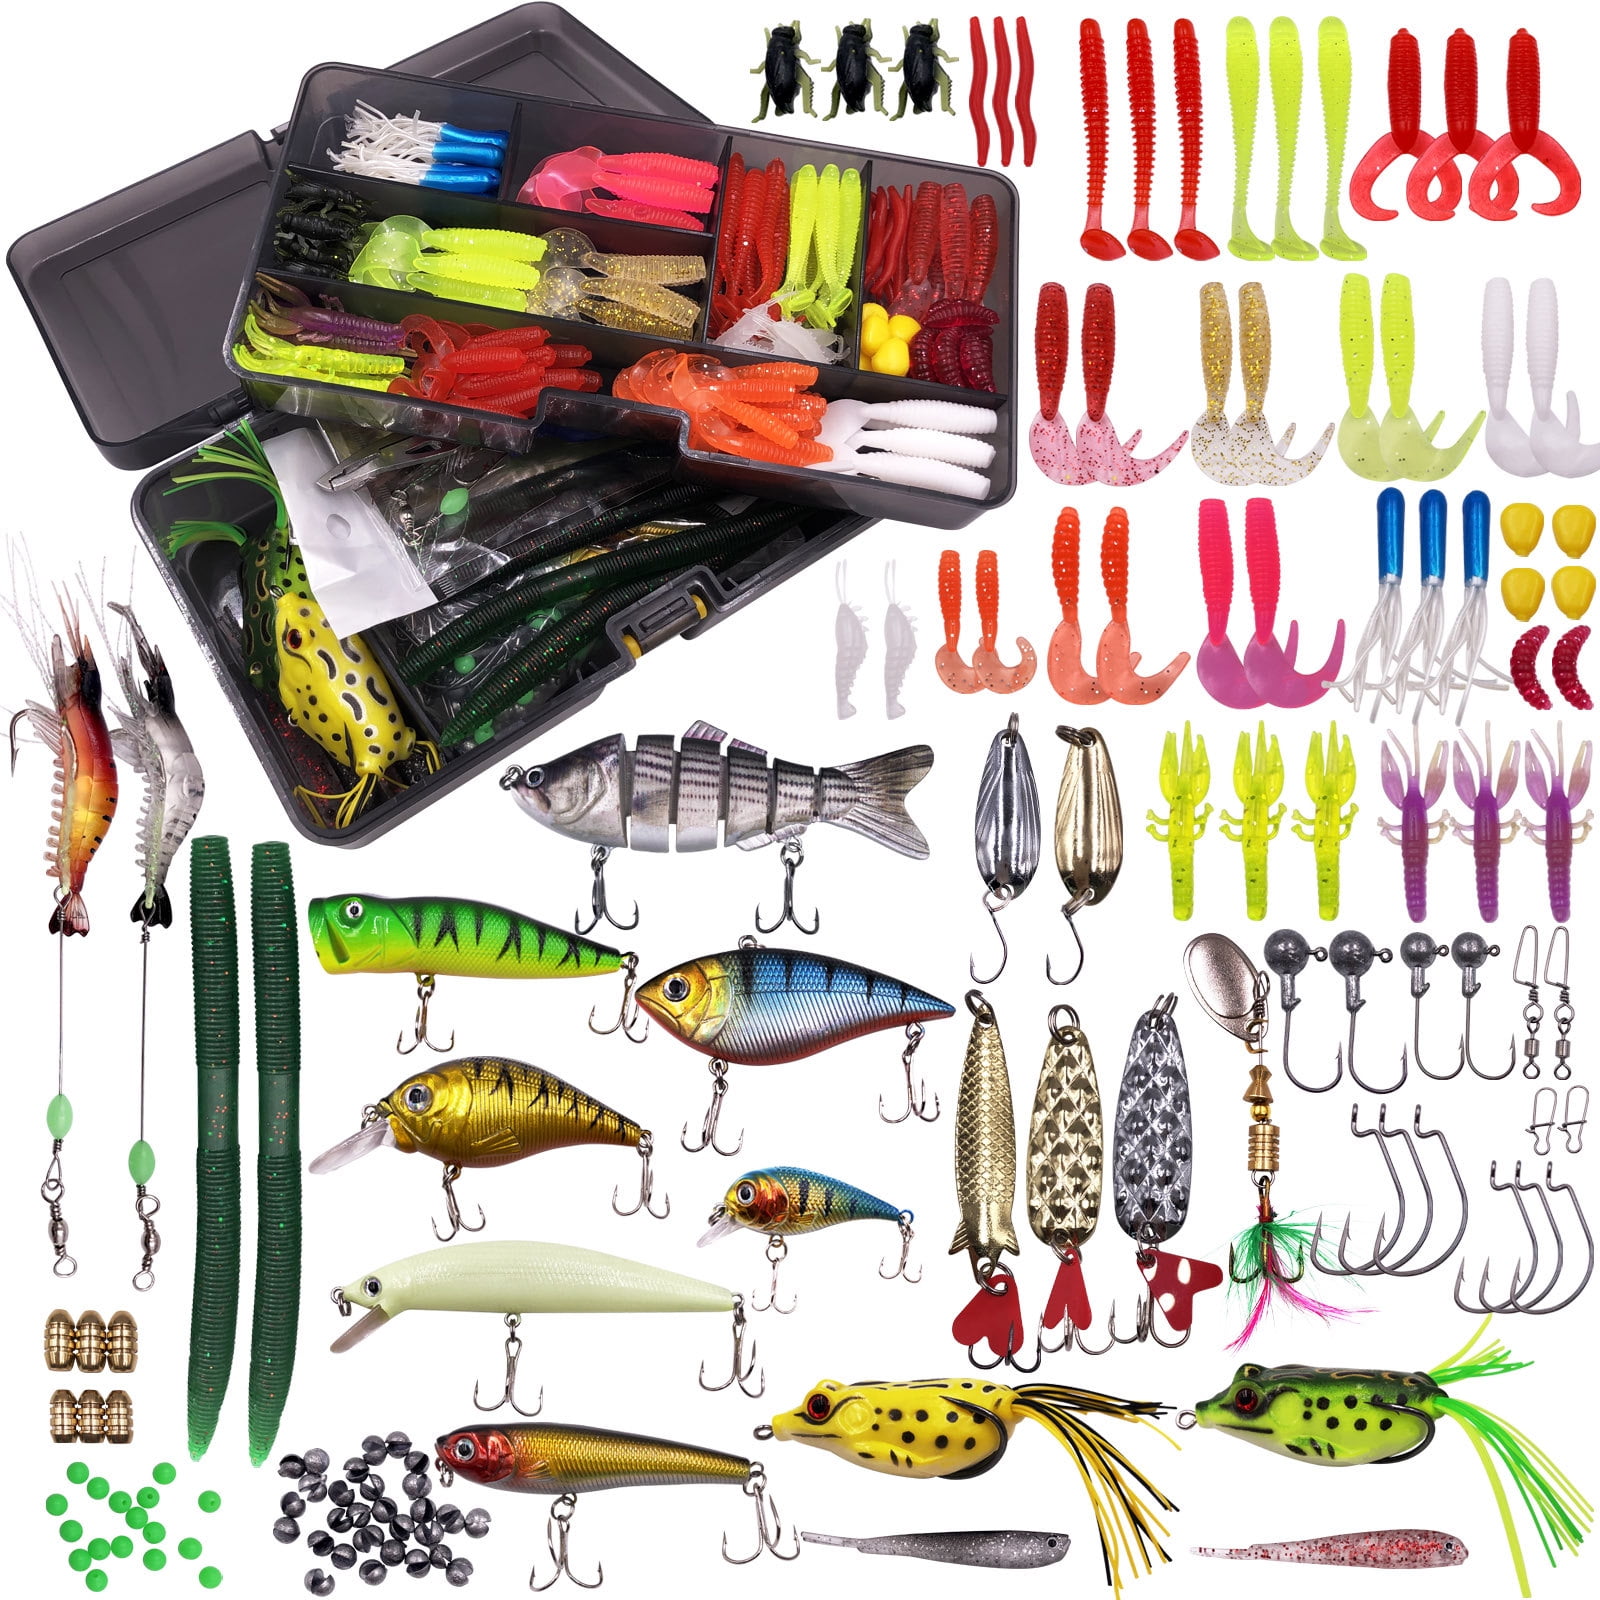 RUNCL Topwater Frog Lures Soft Fishing Lure Kit with Tackle Box for Bass Pike of